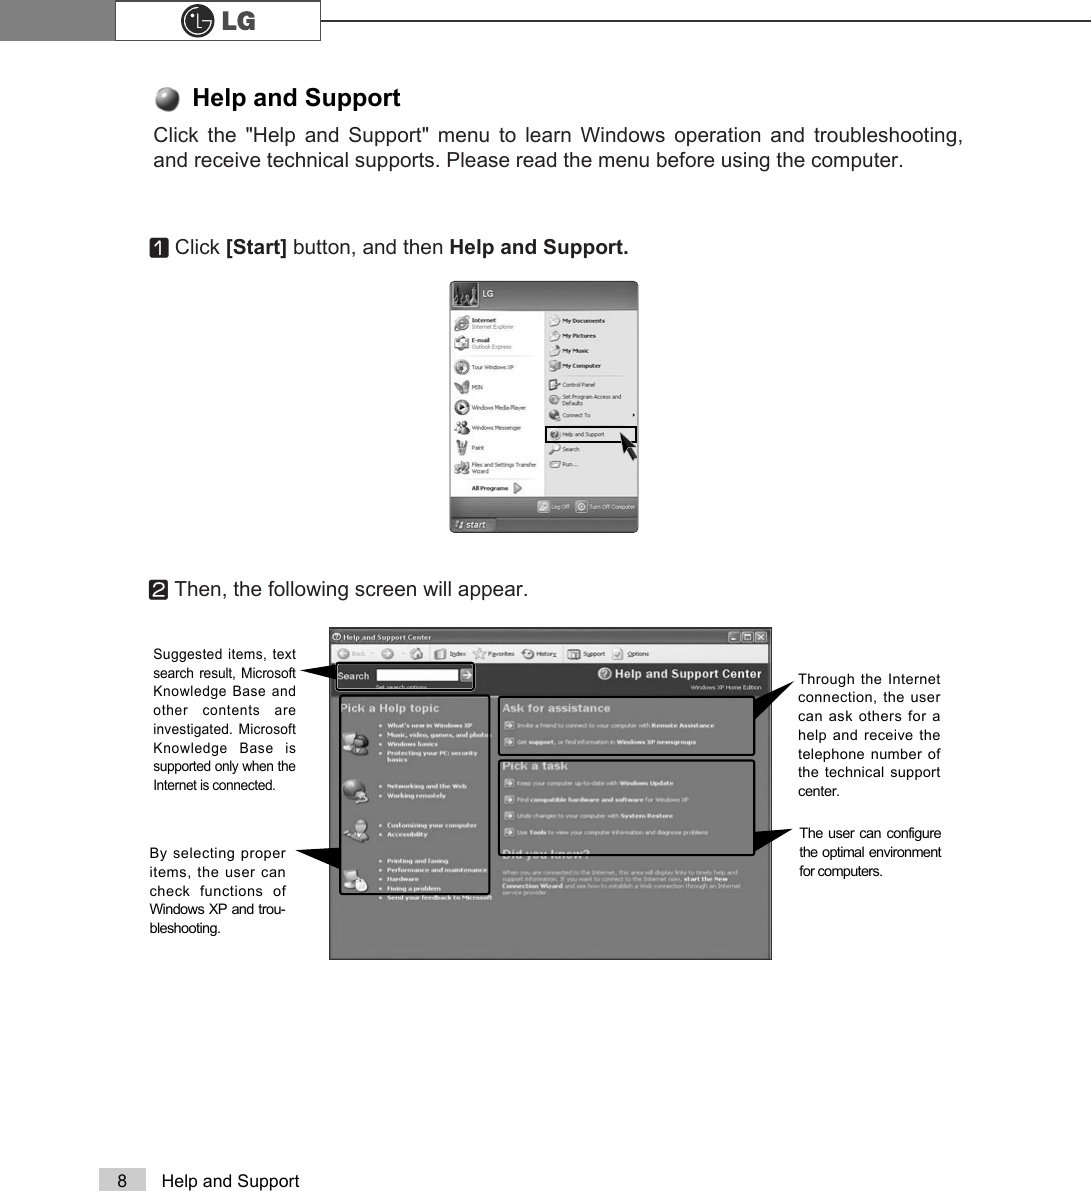 Click the &quot;Help and Support&quot; menu to learn Windows operation and troubleshooting,and receive technical supports. Please read the menu before using the computer. 8 Help and SupportⓞClick [Start] button, and then Help and Support.ⓟThen, the following screen will appear.Help and Support Suggested items, textsearch result, MicrosoftKnowledge Base andother contents areinvestigated. MicrosoftKnowledge Base issupported only when theInternet is connected.By selecting properitems, the user cancheck functions ofWindows XP and trou-bleshooting.Through the Internetconnection, the usercan ask others for ahelp and receive thetelephone number ofthe technical supportcenter.The user can configurethe optimal environmentfor computers.